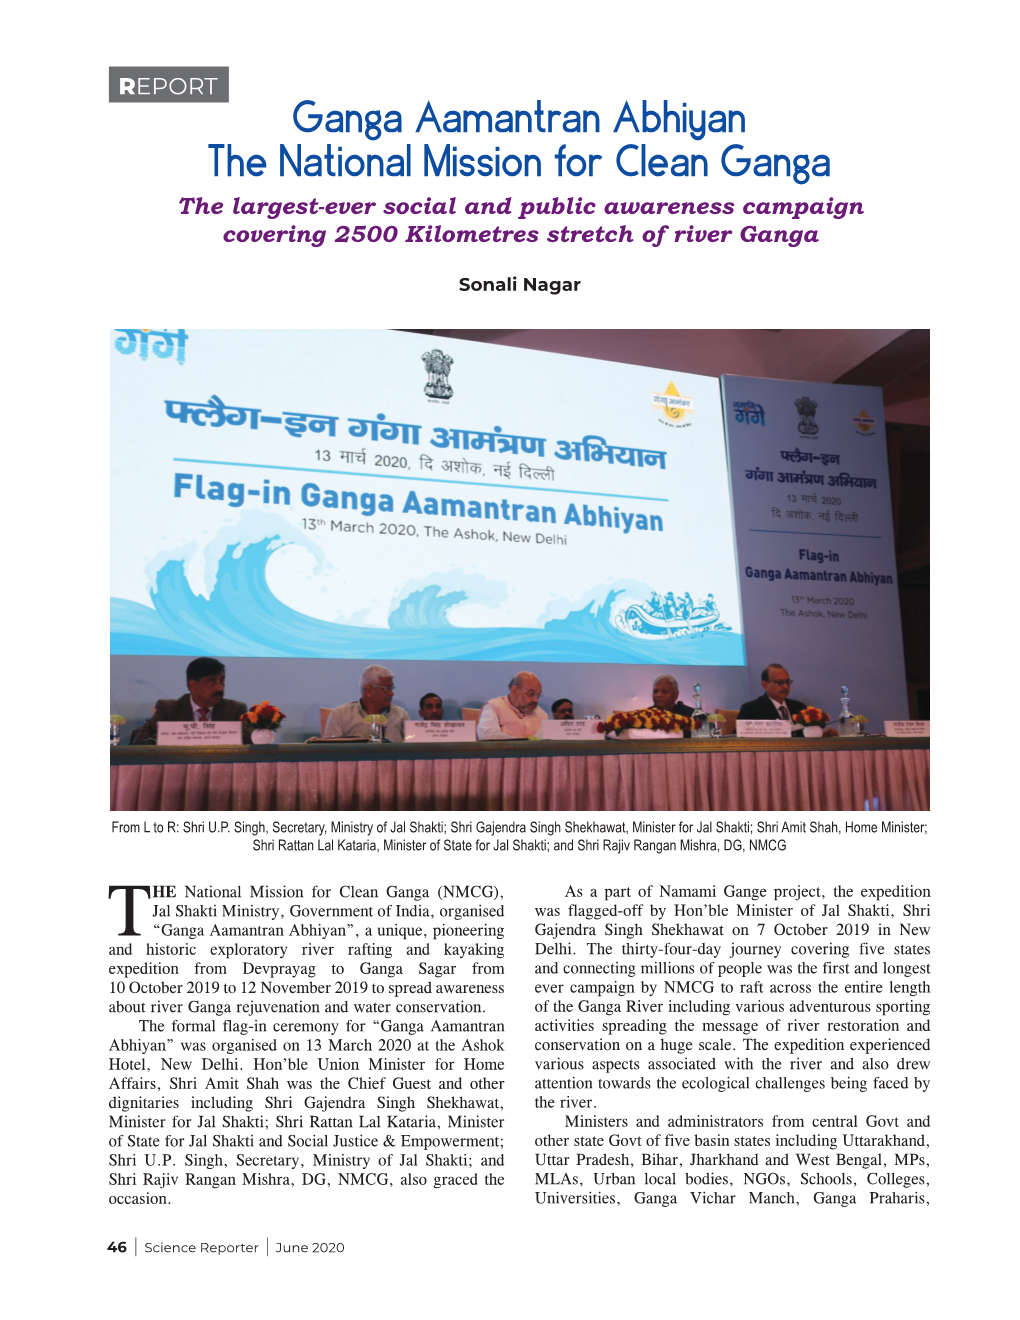 Ganga Aamantran Abhiyan the National Mission for Clean Ganga the Largest-Ever Social and Public Awareness Campaign Covering 2500 Kilometres Stretch of River Ganga